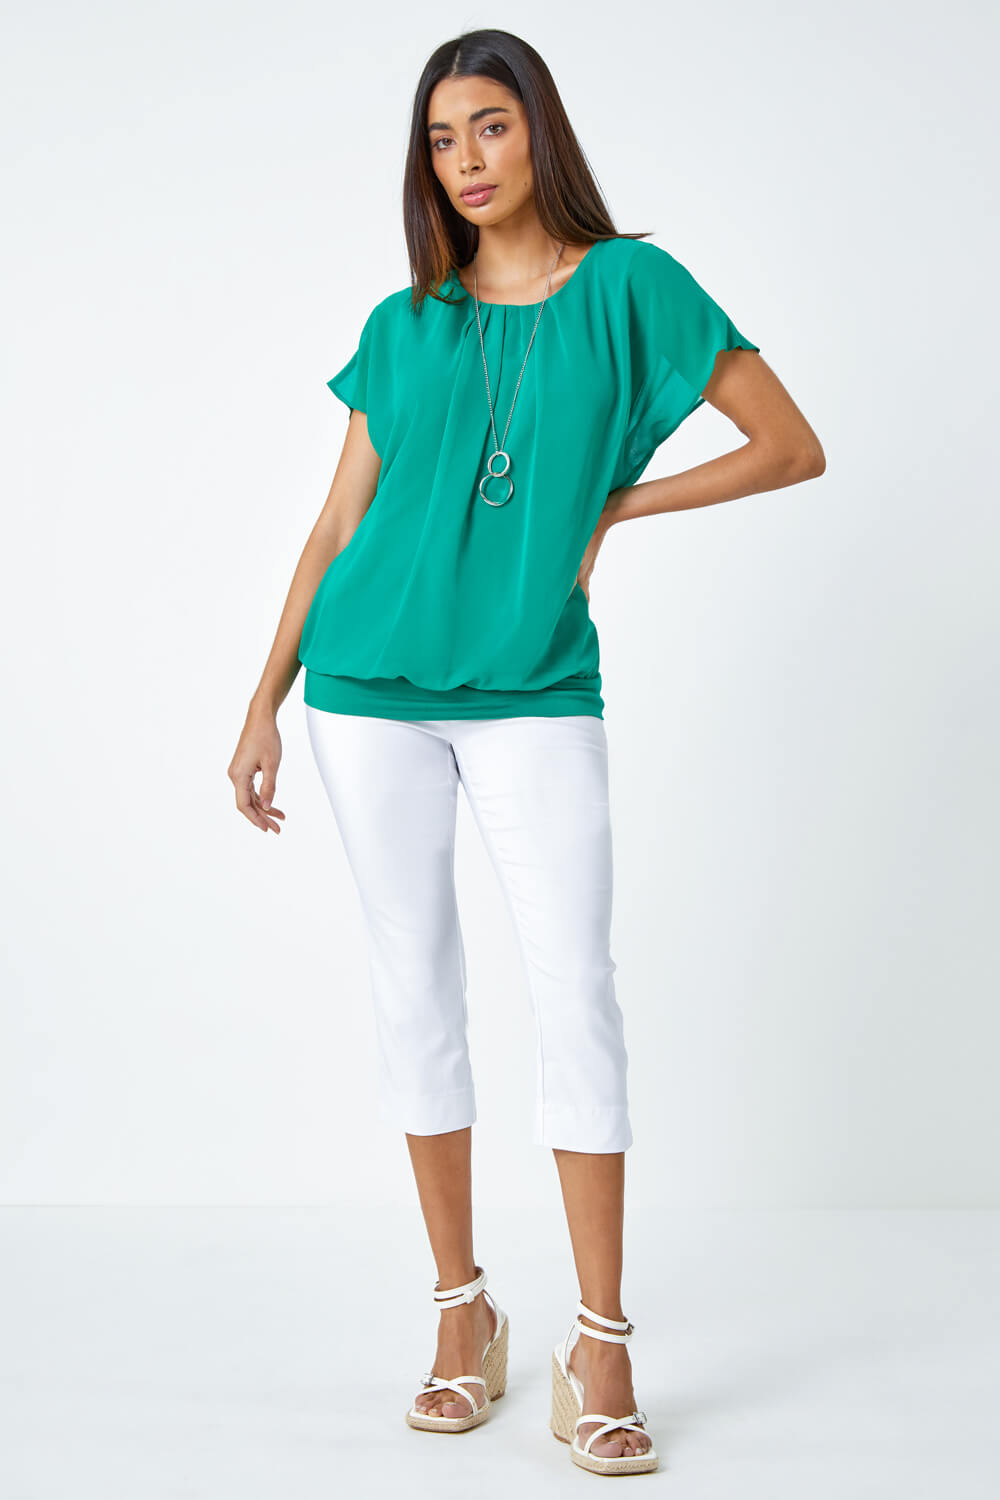 Jade Chiffon Jersey Blouson Top with Necklace, Image 2 of 5